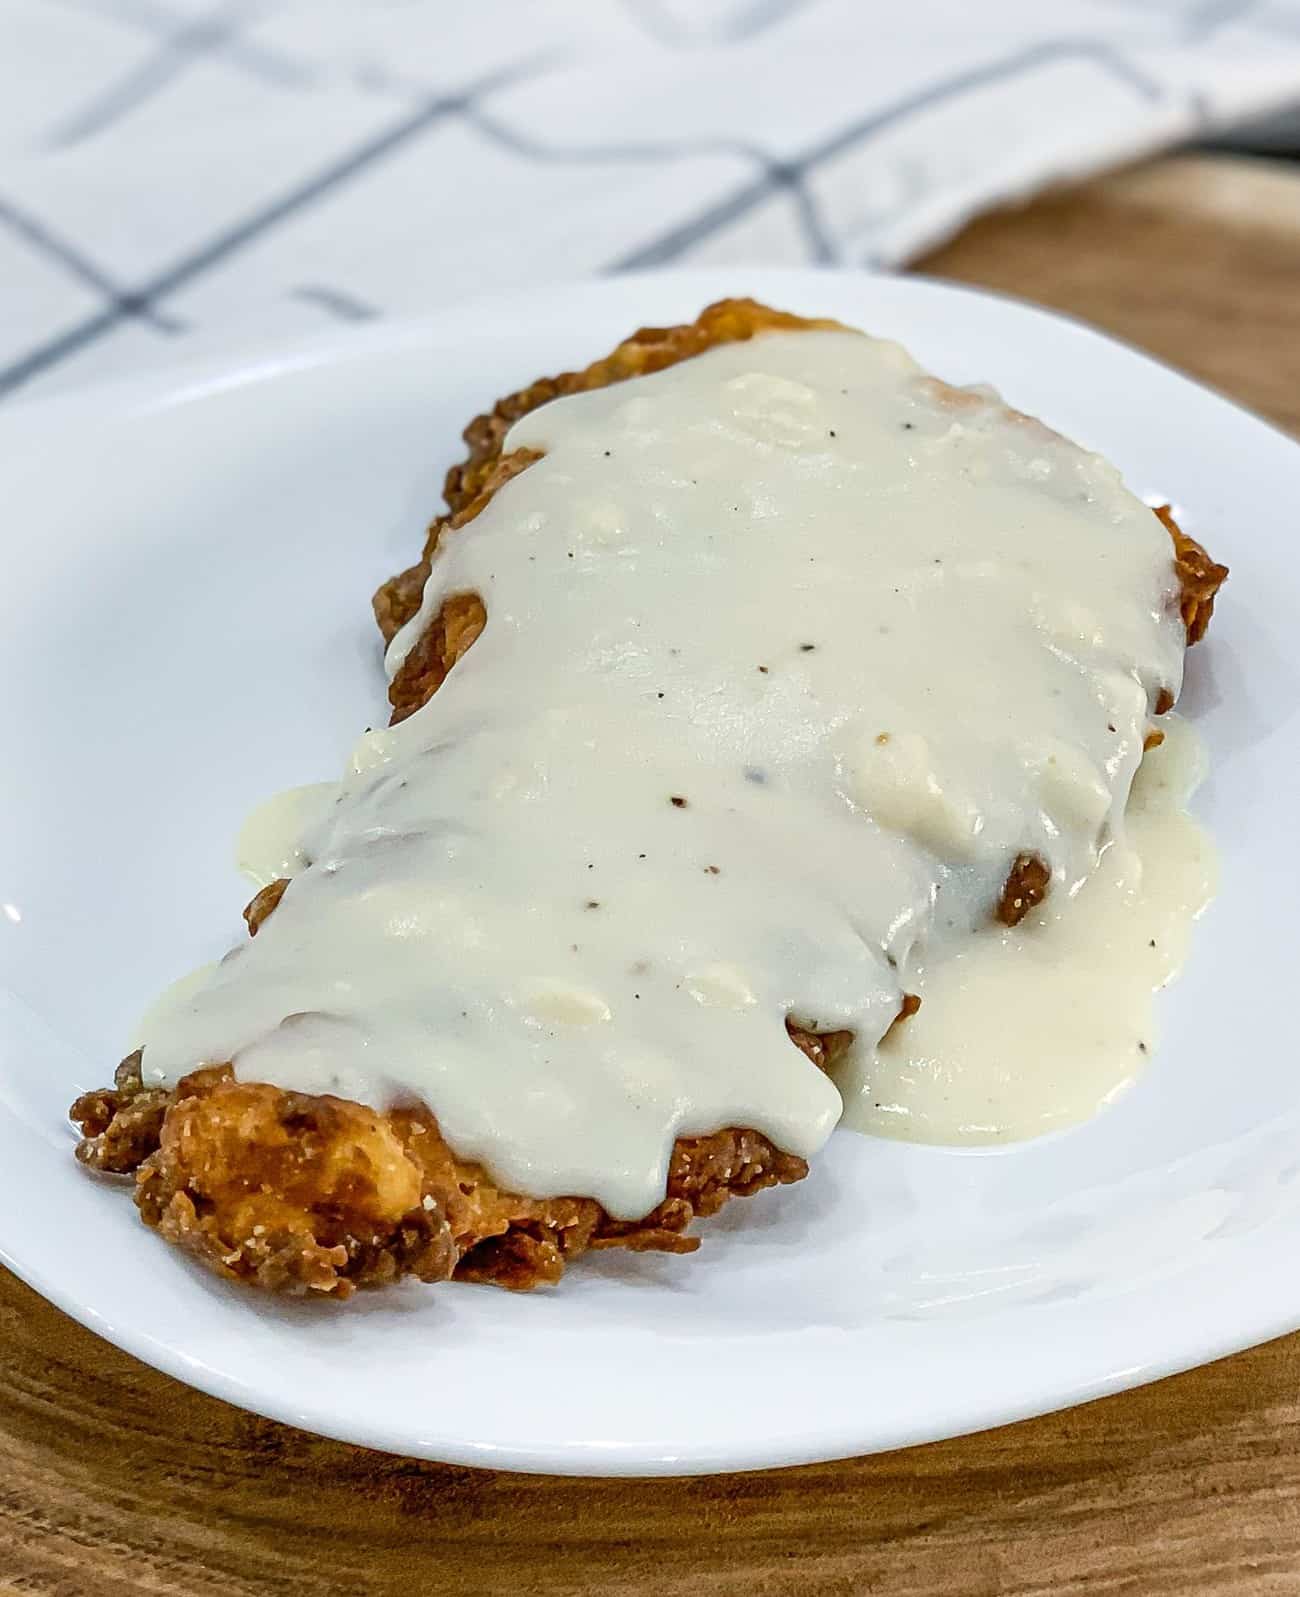 Southern-style Country Fried Chicken